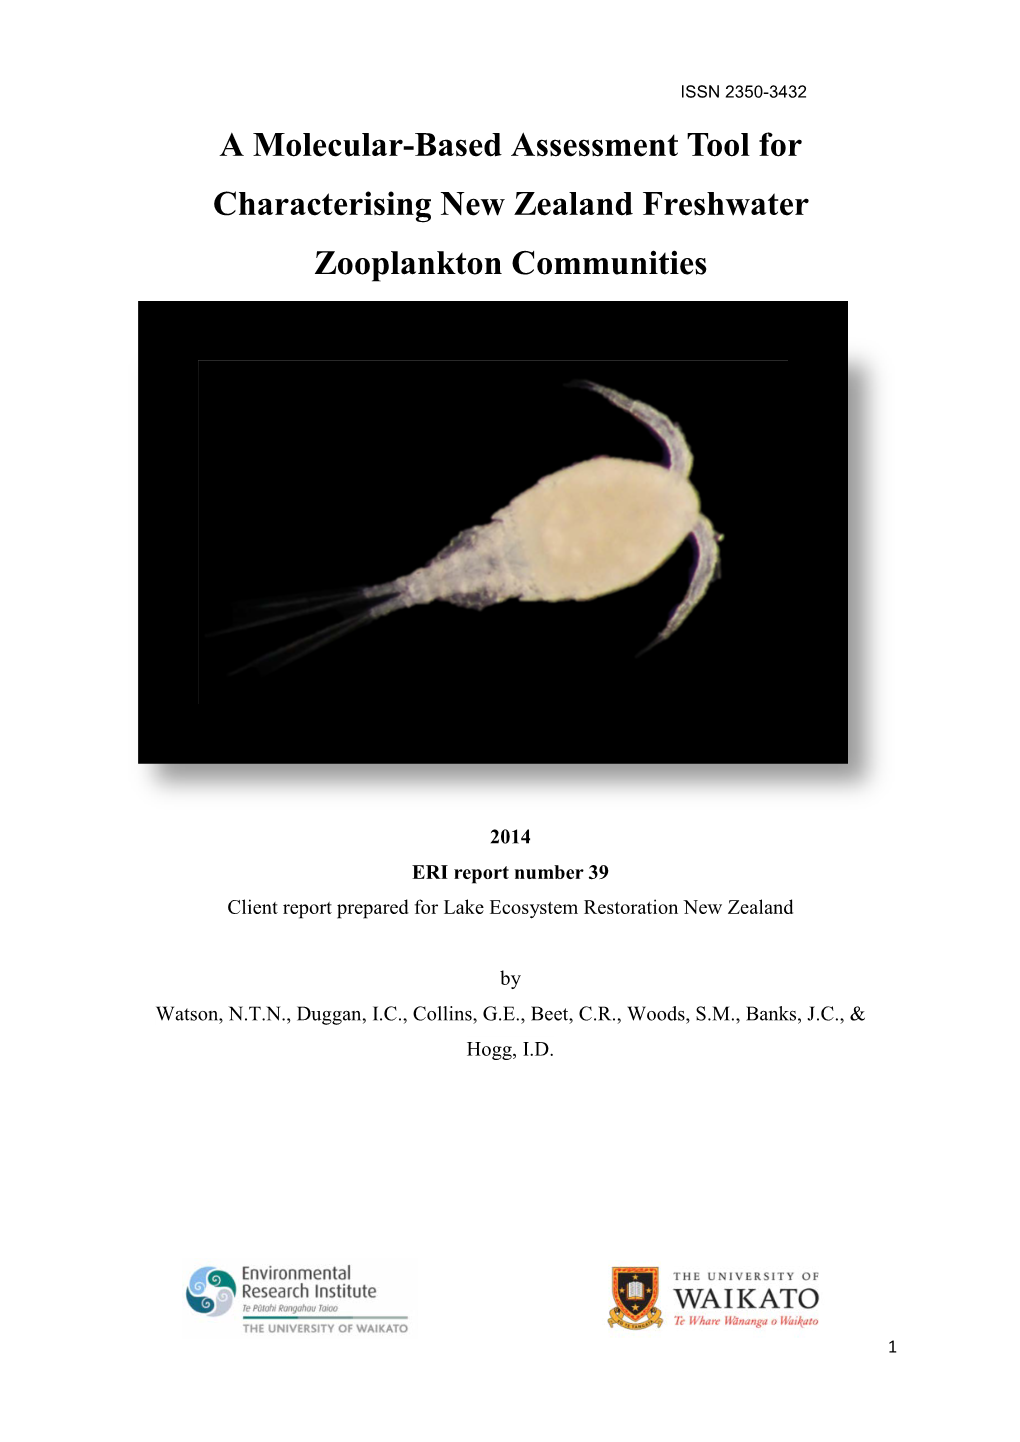 A Molecular-Based Assessment Tool for Characterising New Zealand Freshwater Zooplankton Communities